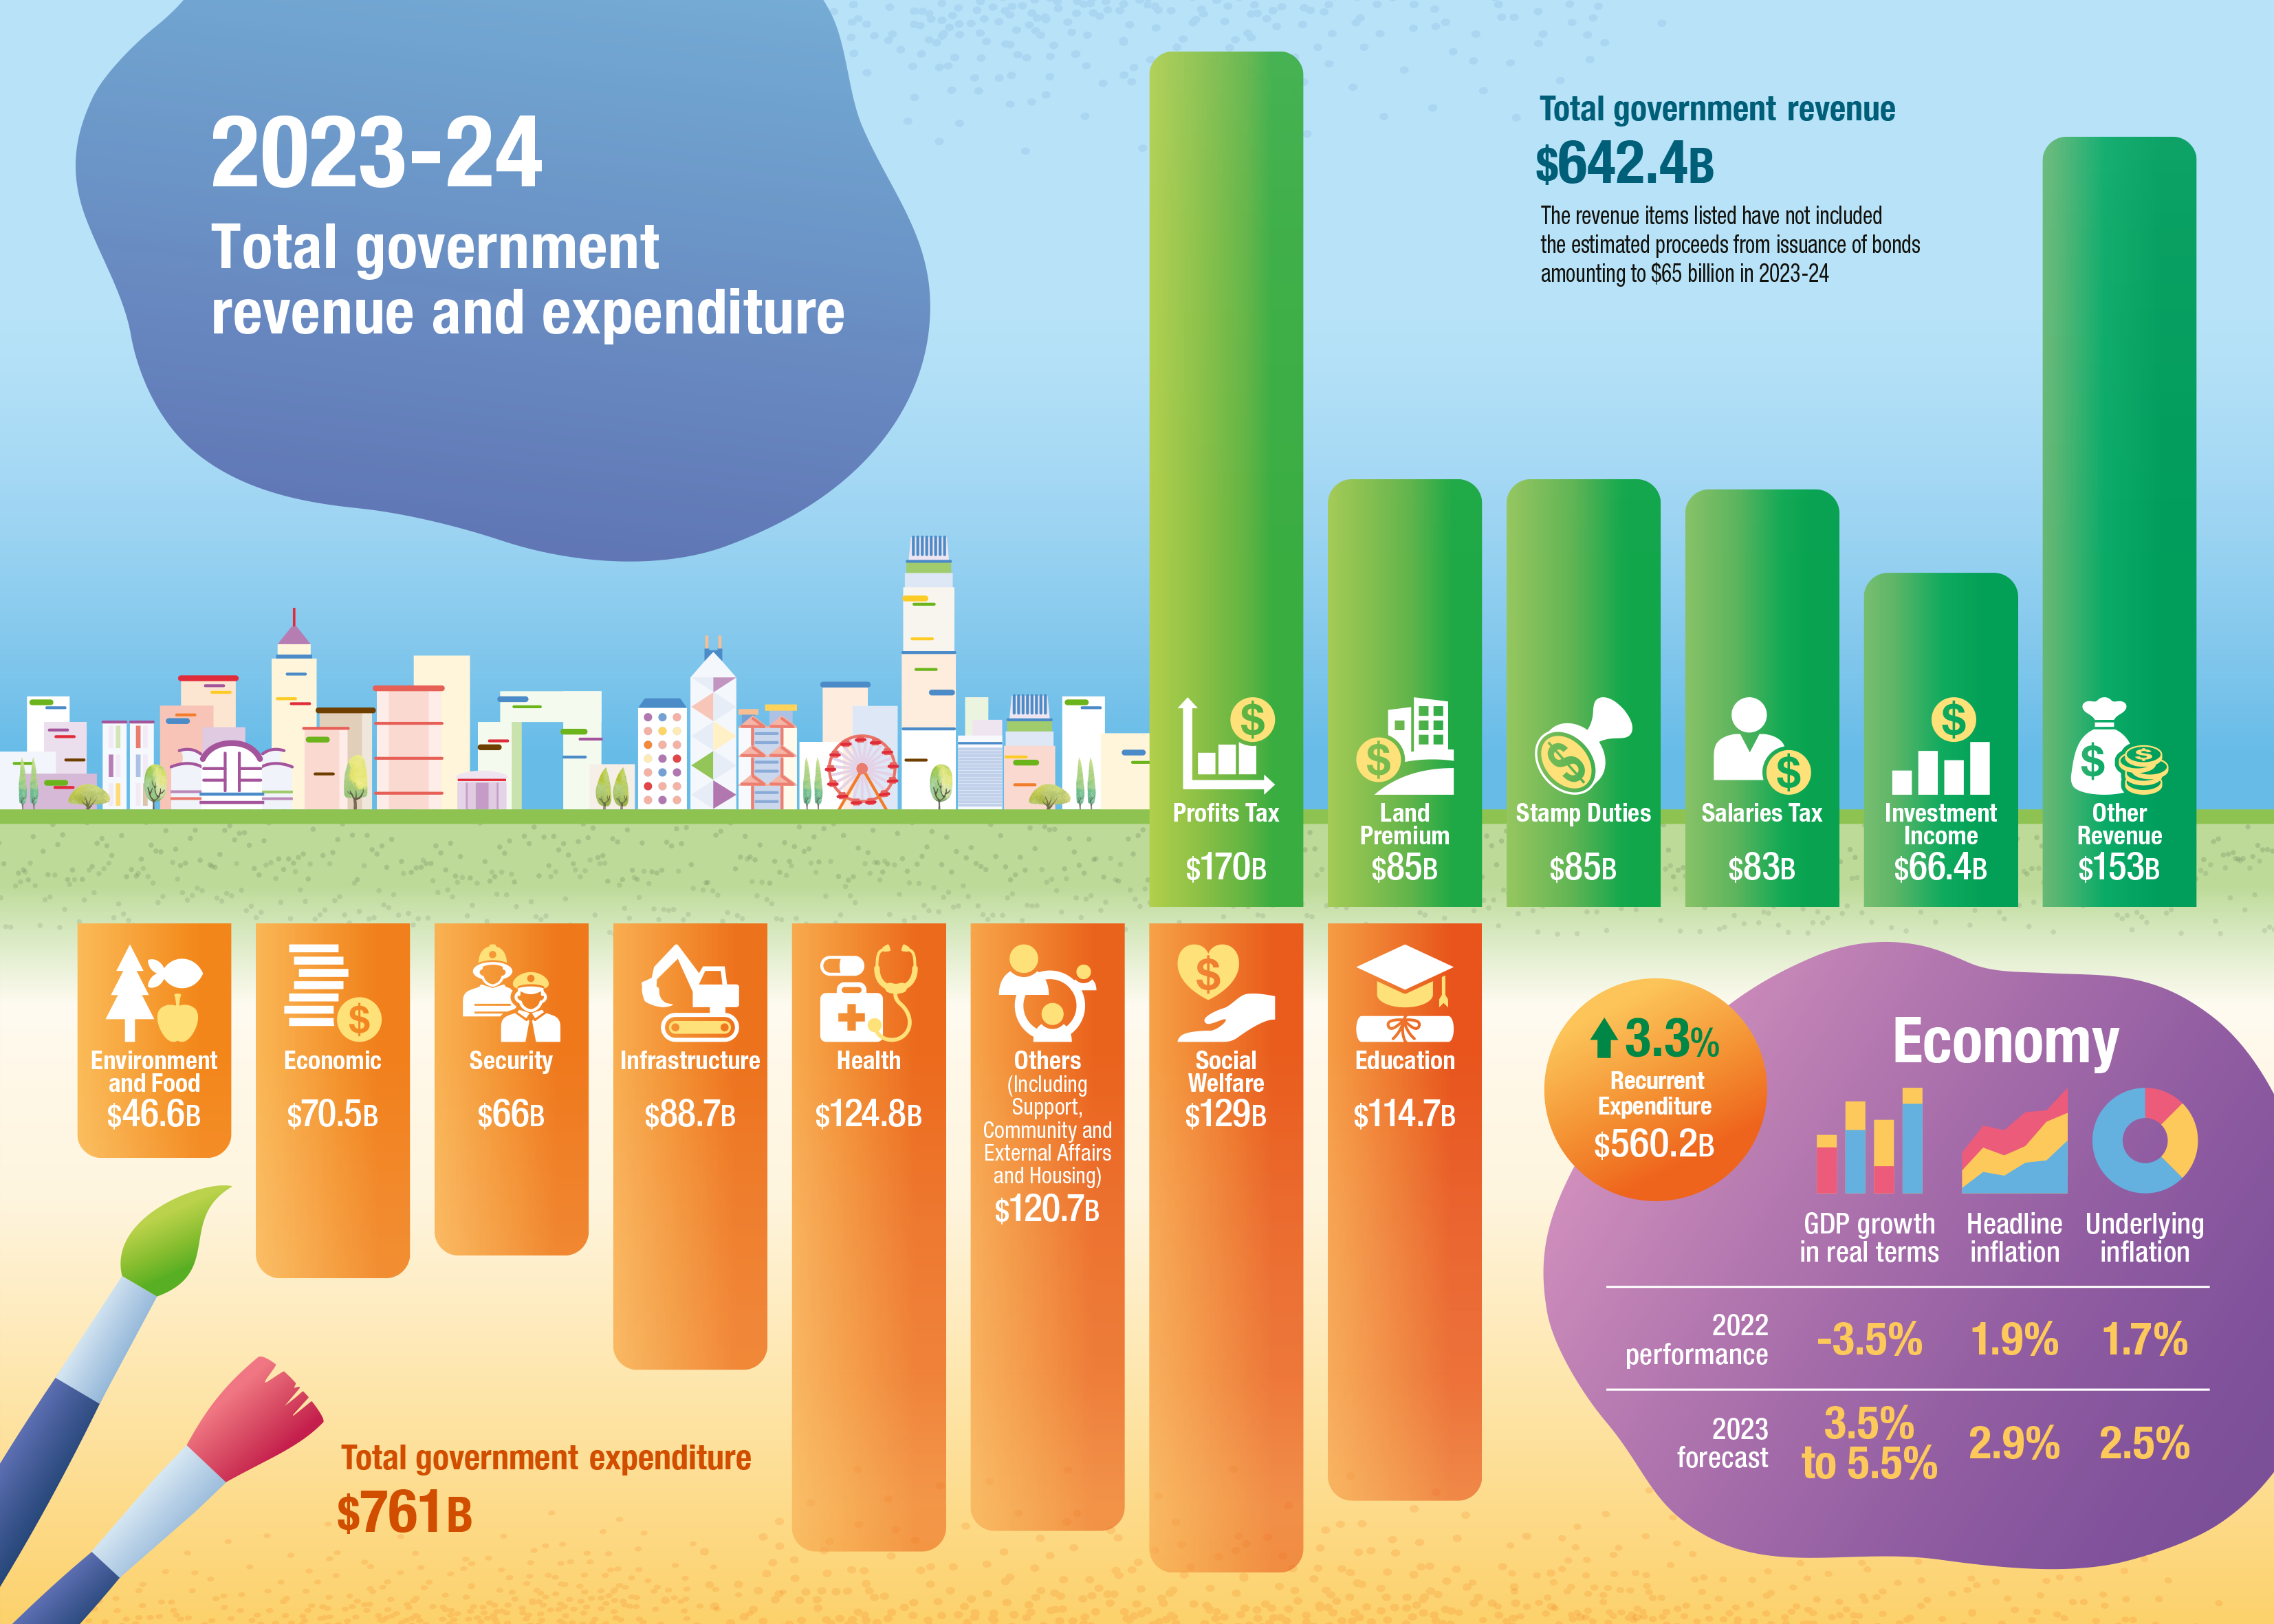 2023-24 Total government revenue and expenditure